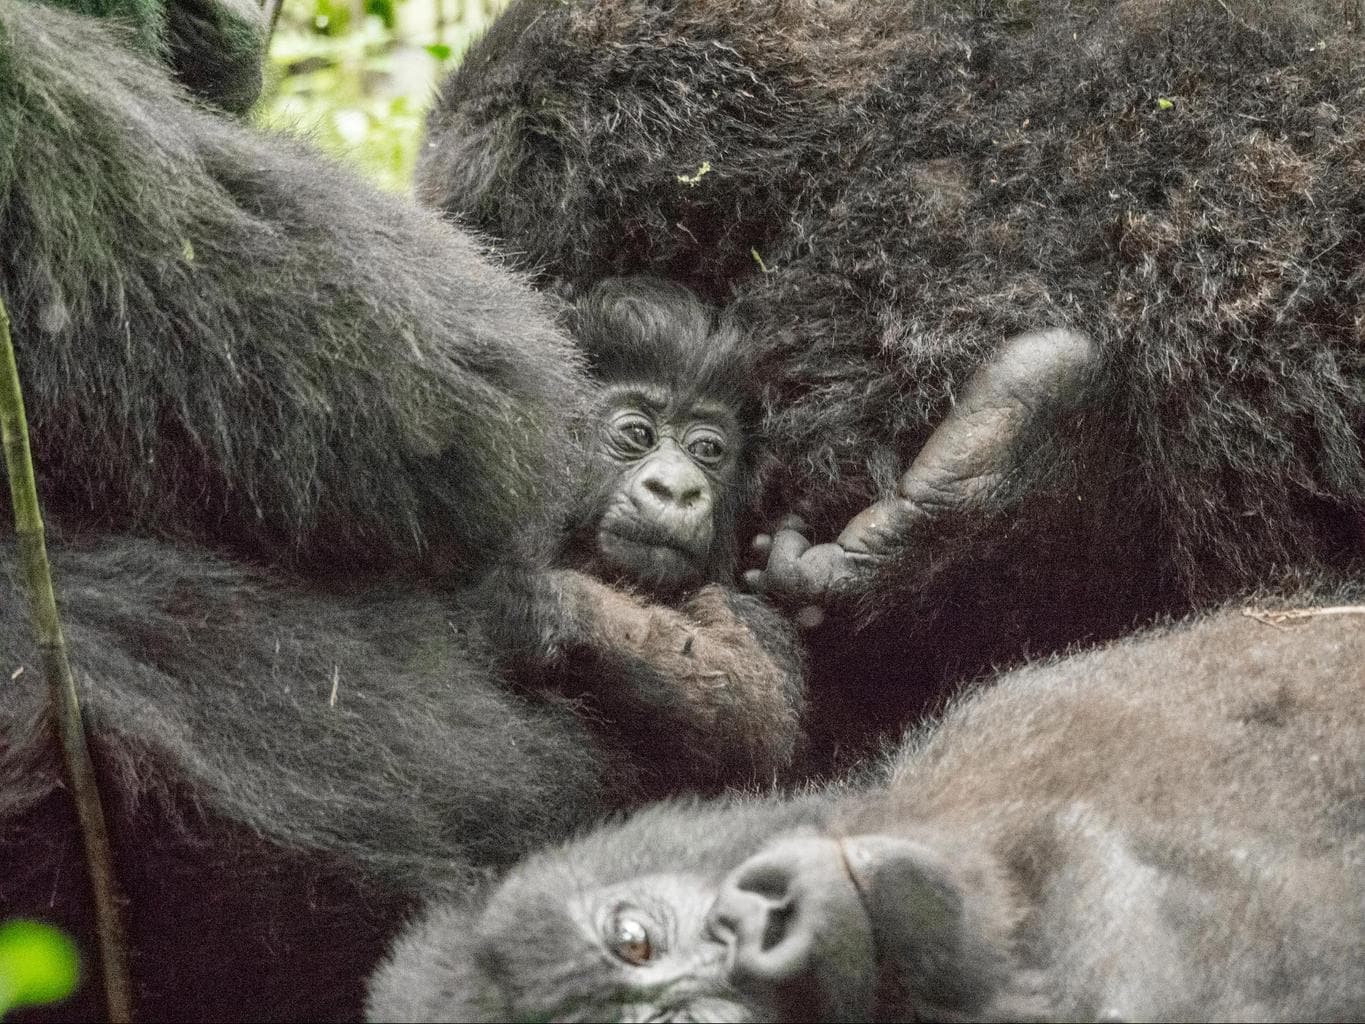 Baby gorilla with mommy